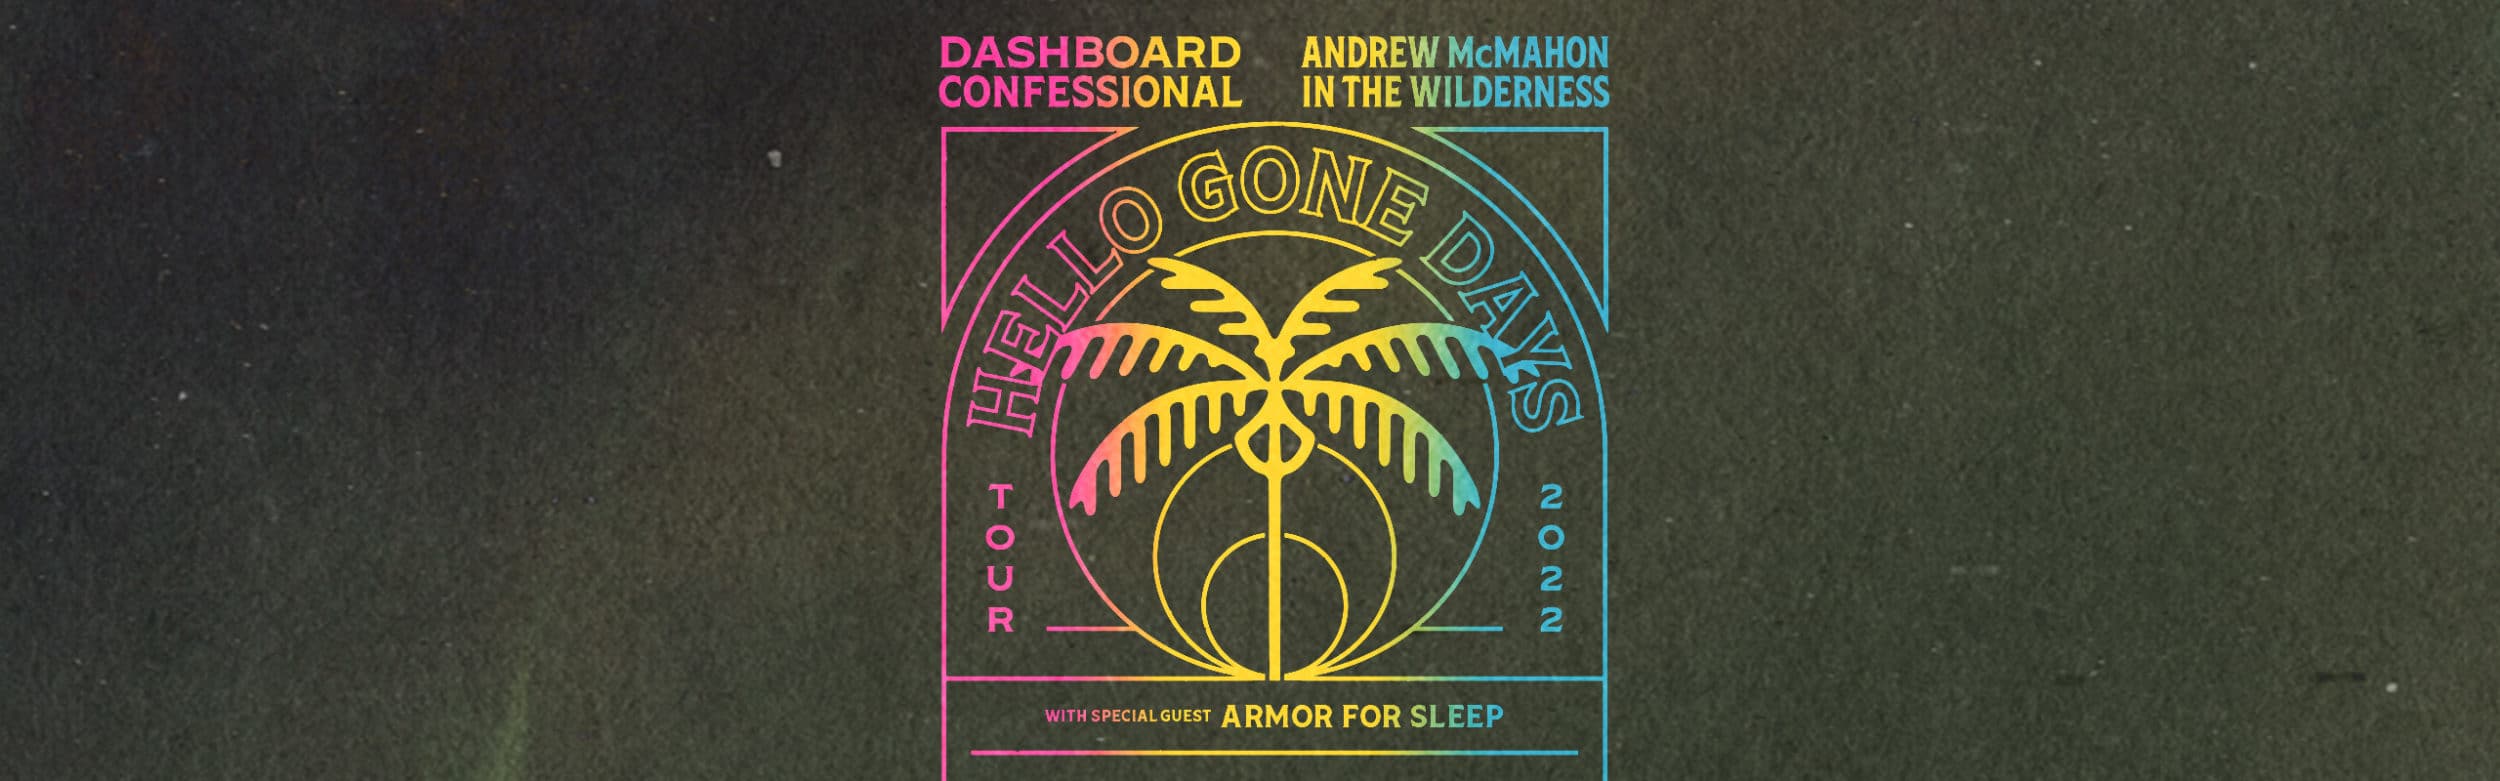 Dashboard Confessional and Andrew McMahon in The Wilderness